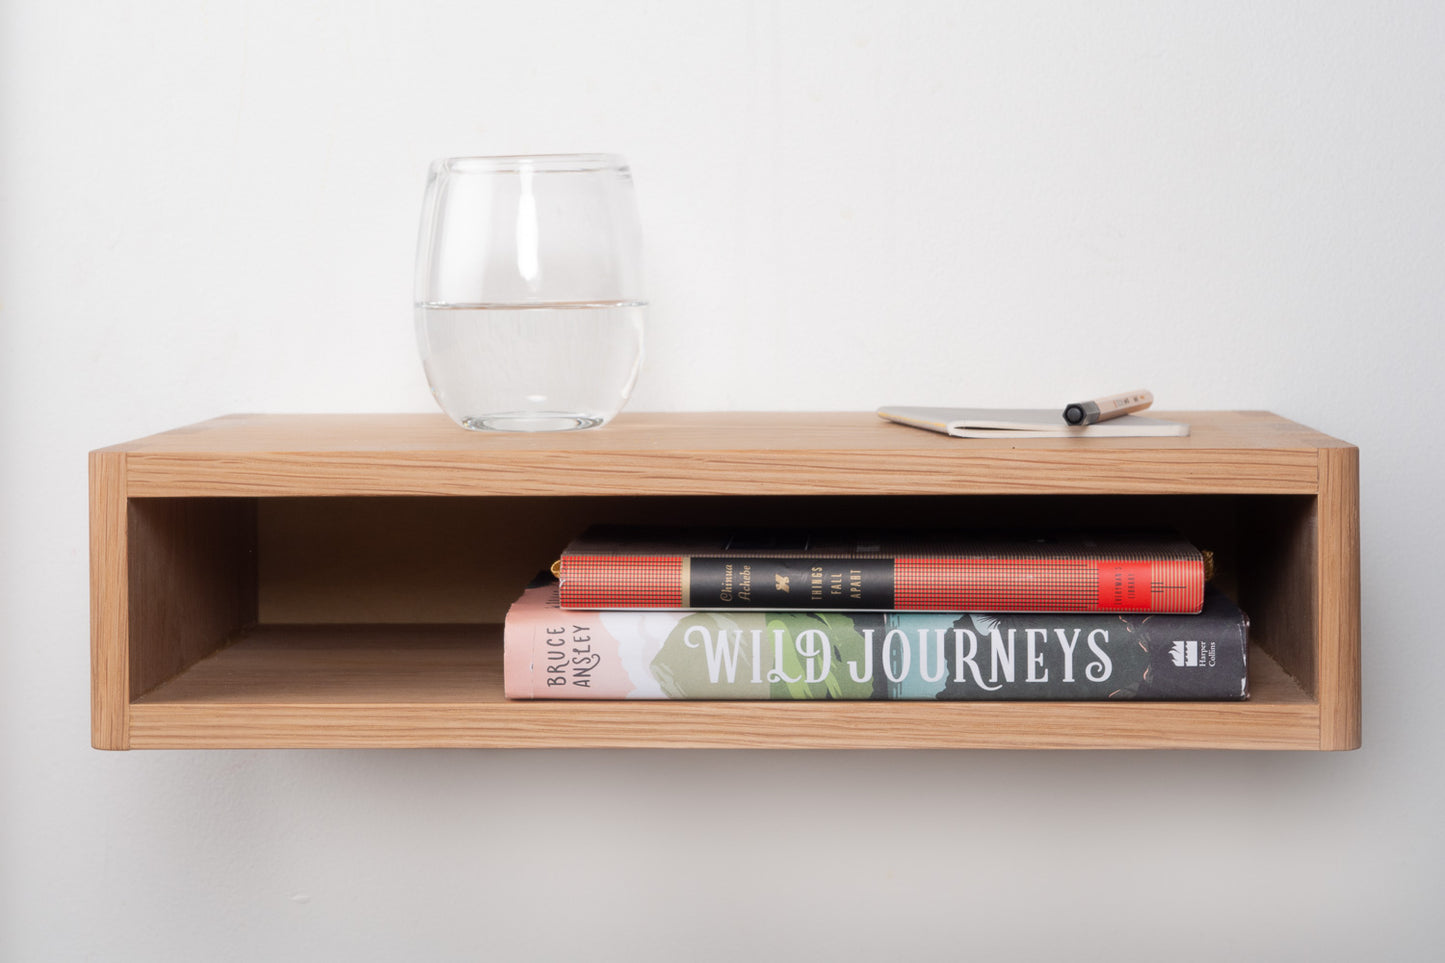 Mesa Bedside Shelf in White Oak pictured with a glass of water, notebook, pen and two books. Designed and made by Hey, Porter.